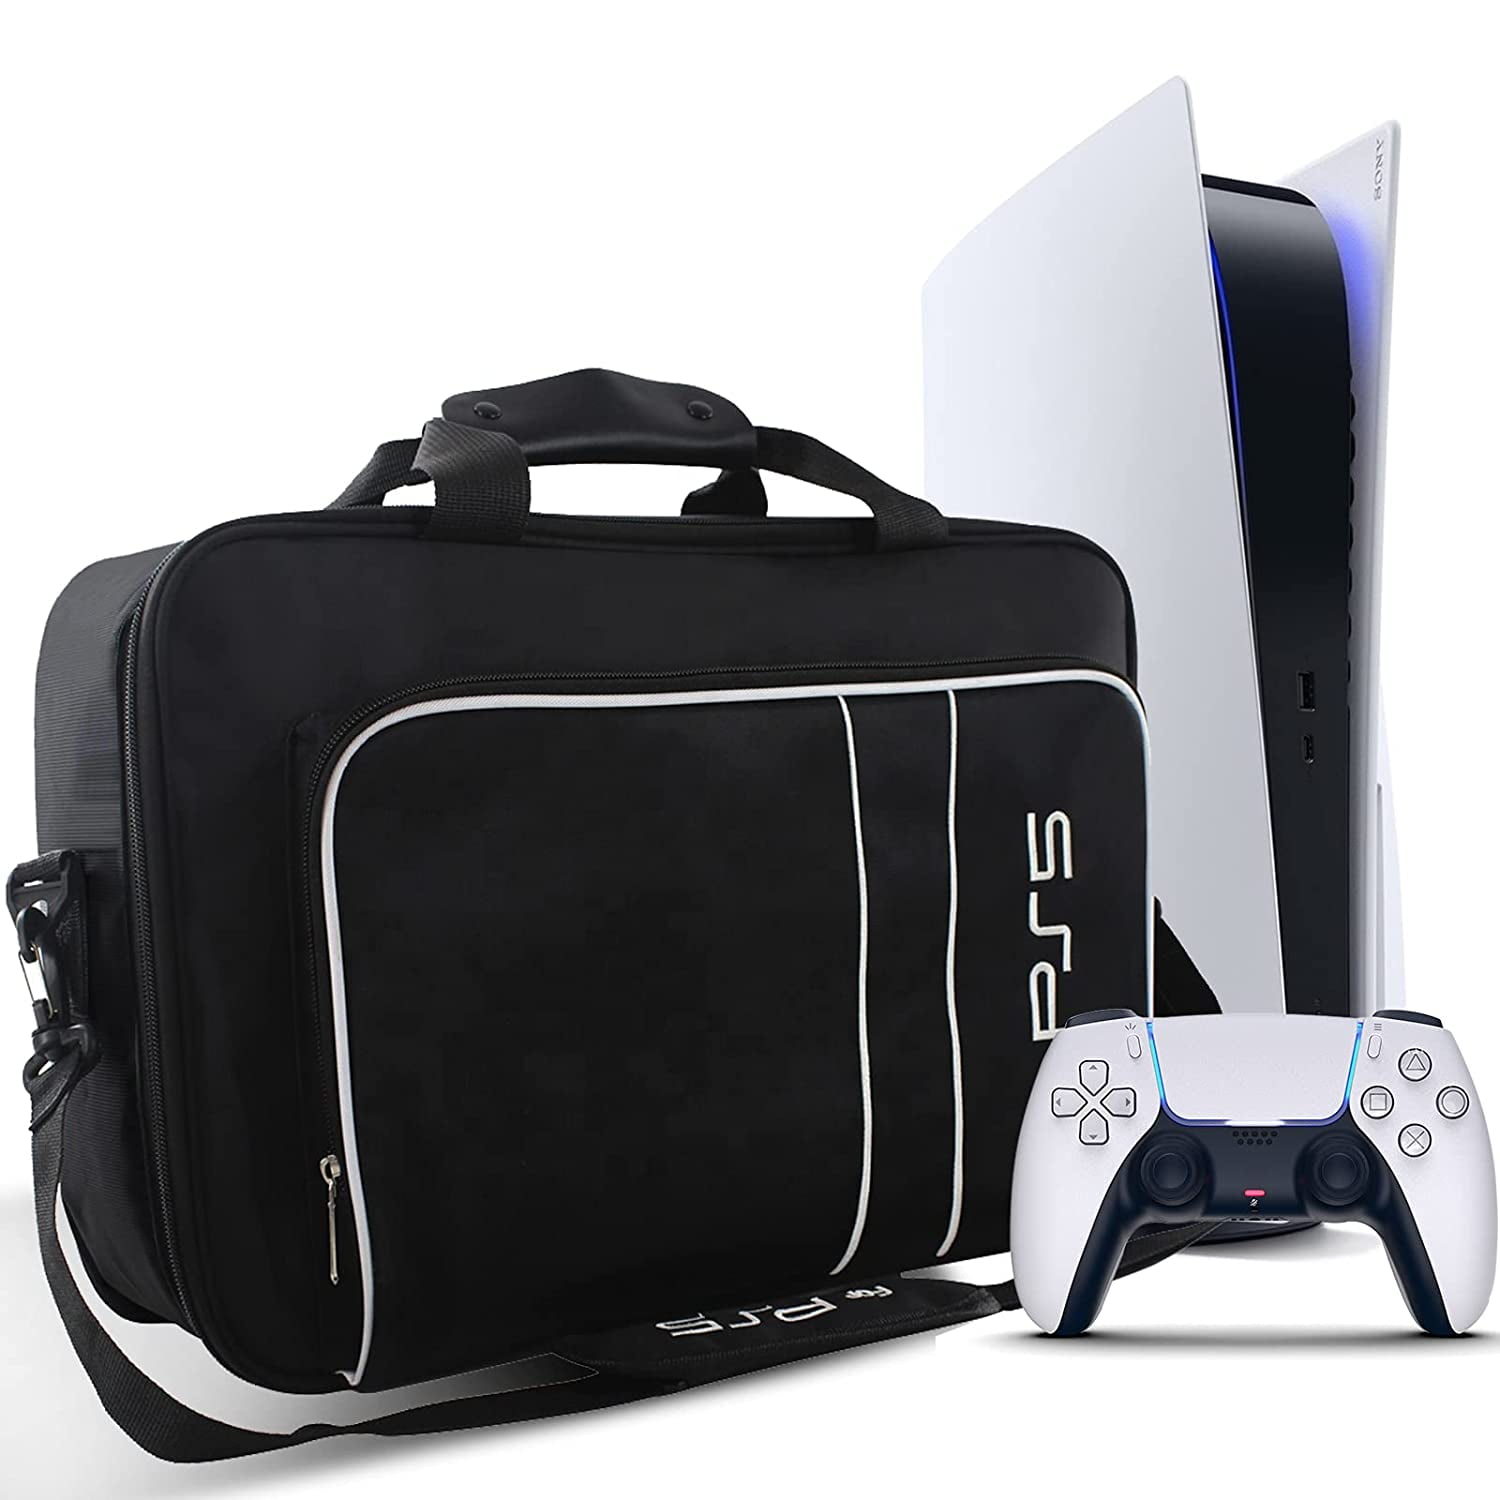 PS5 Carrying Case, Travel Bag Case for PS5 Console Disc/Digital Edition ...